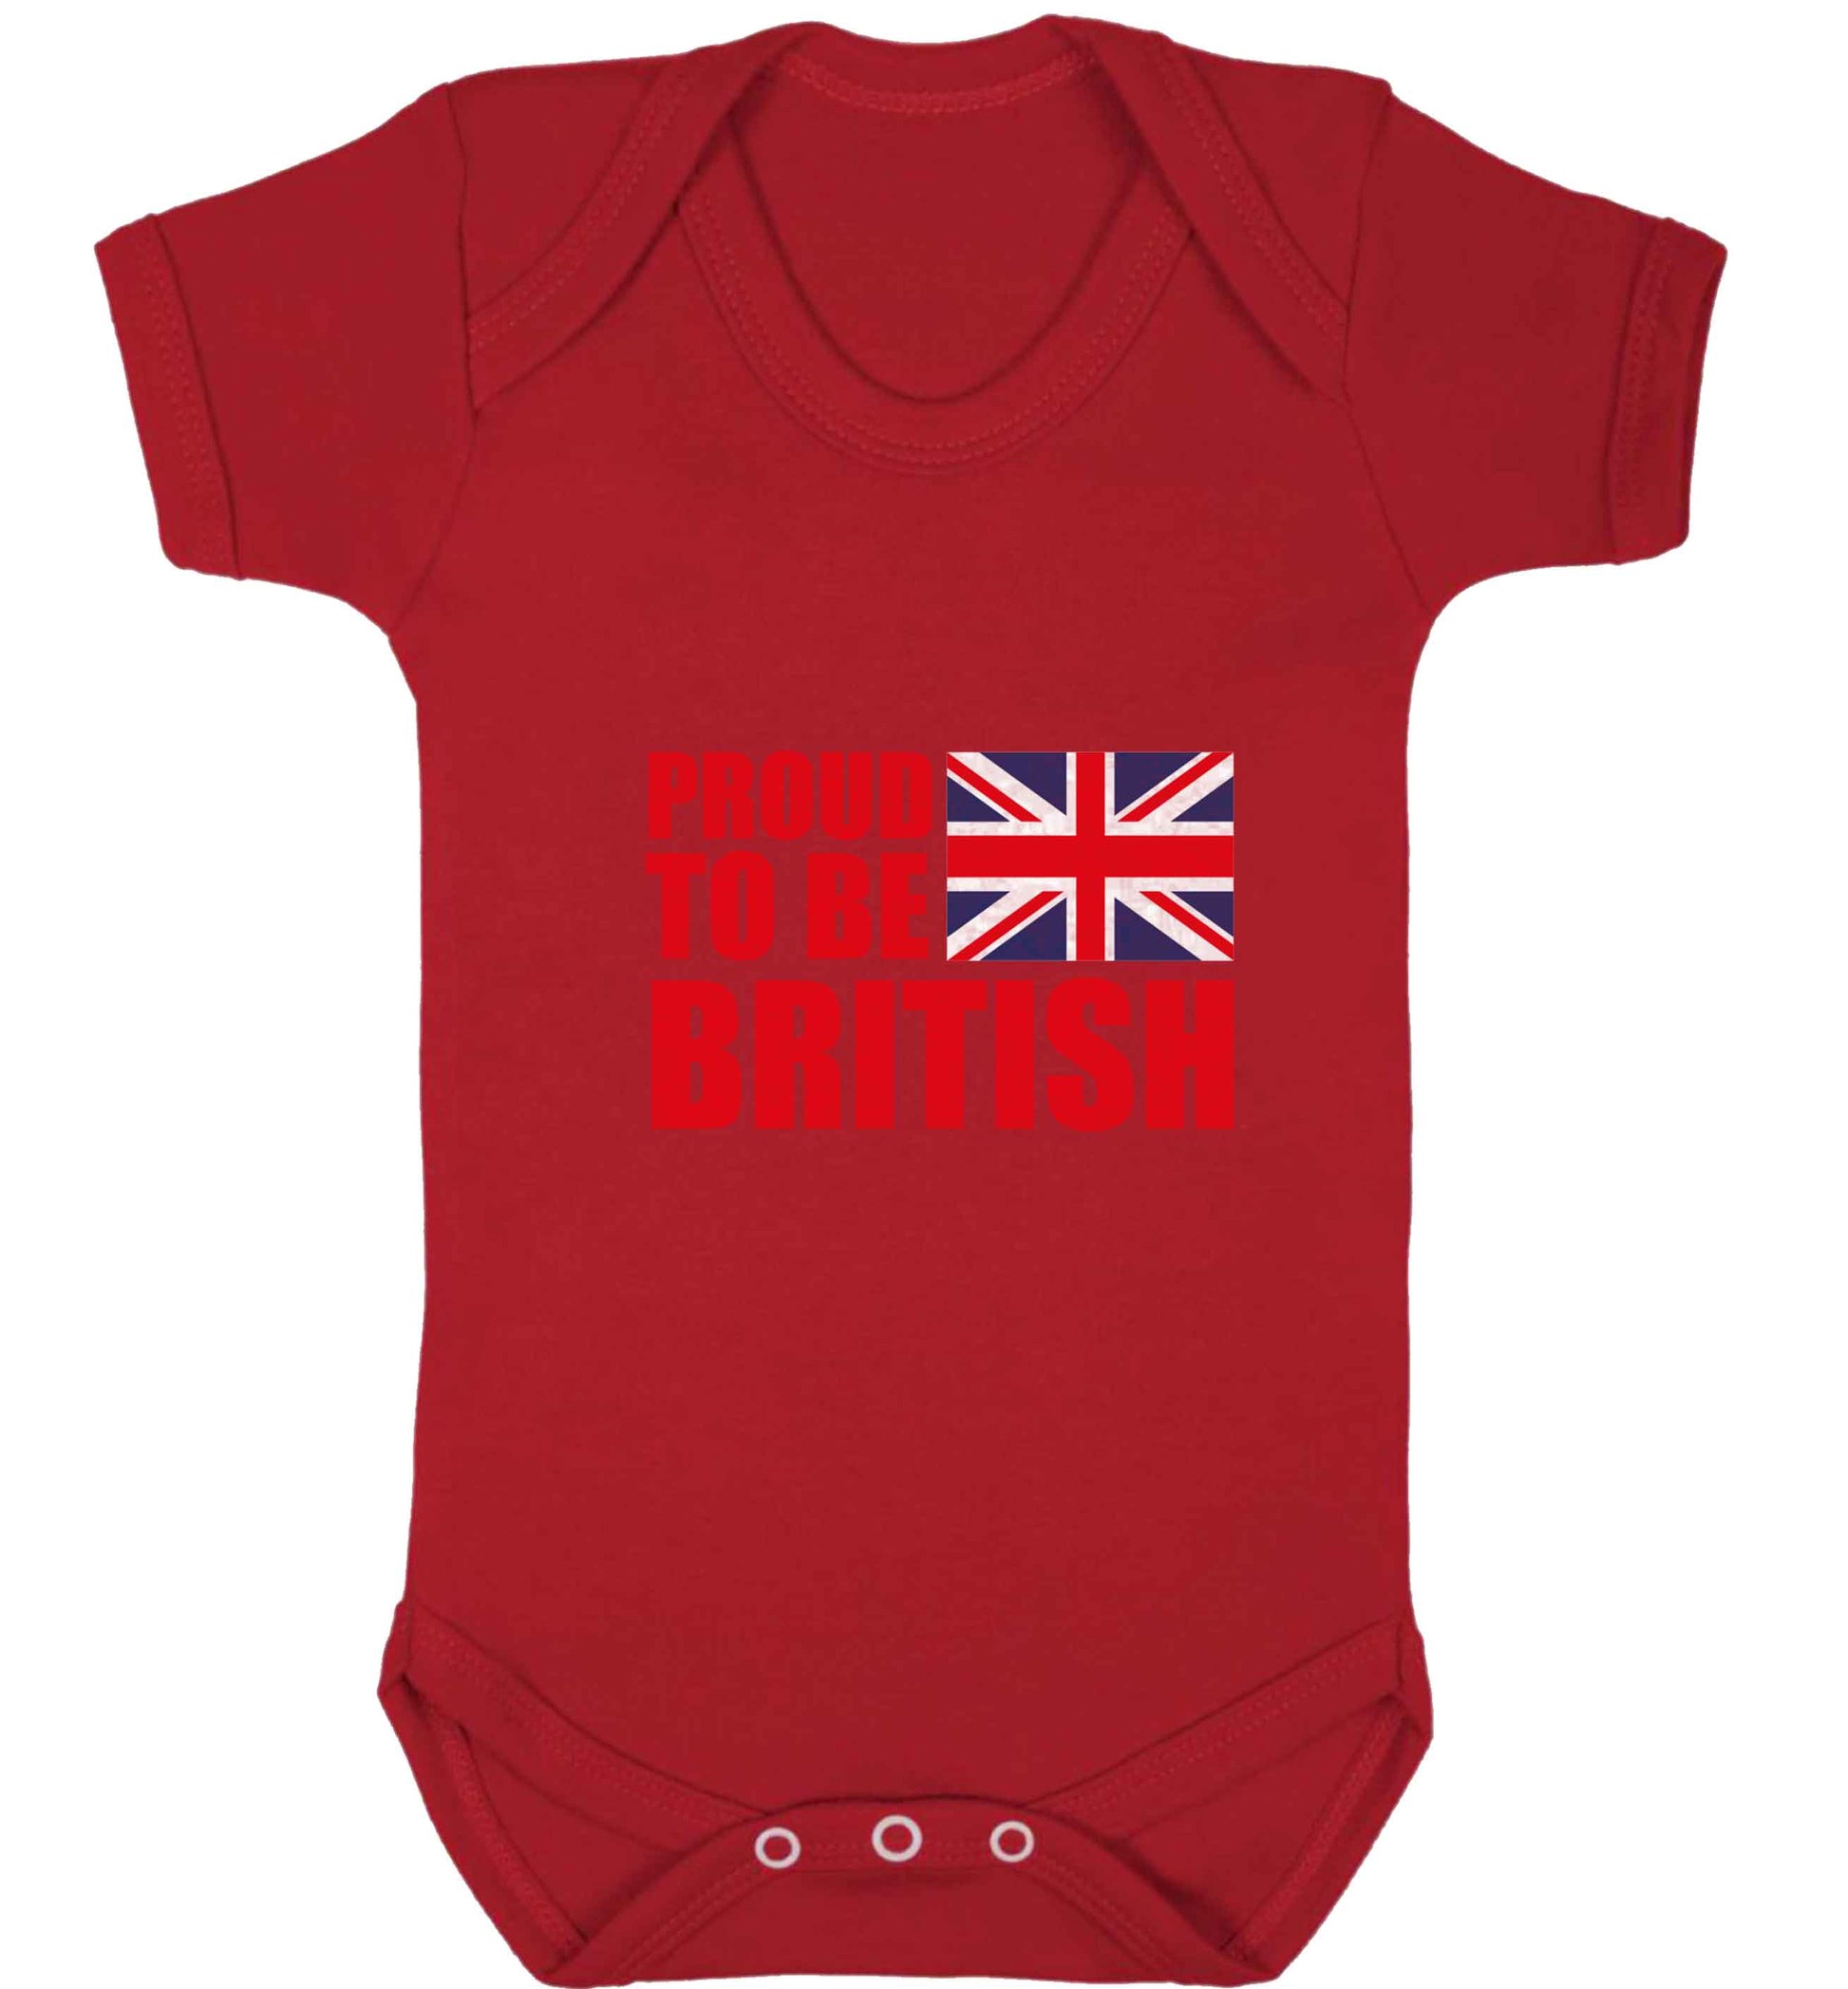 Proud to be British baby vest red 18-24 months